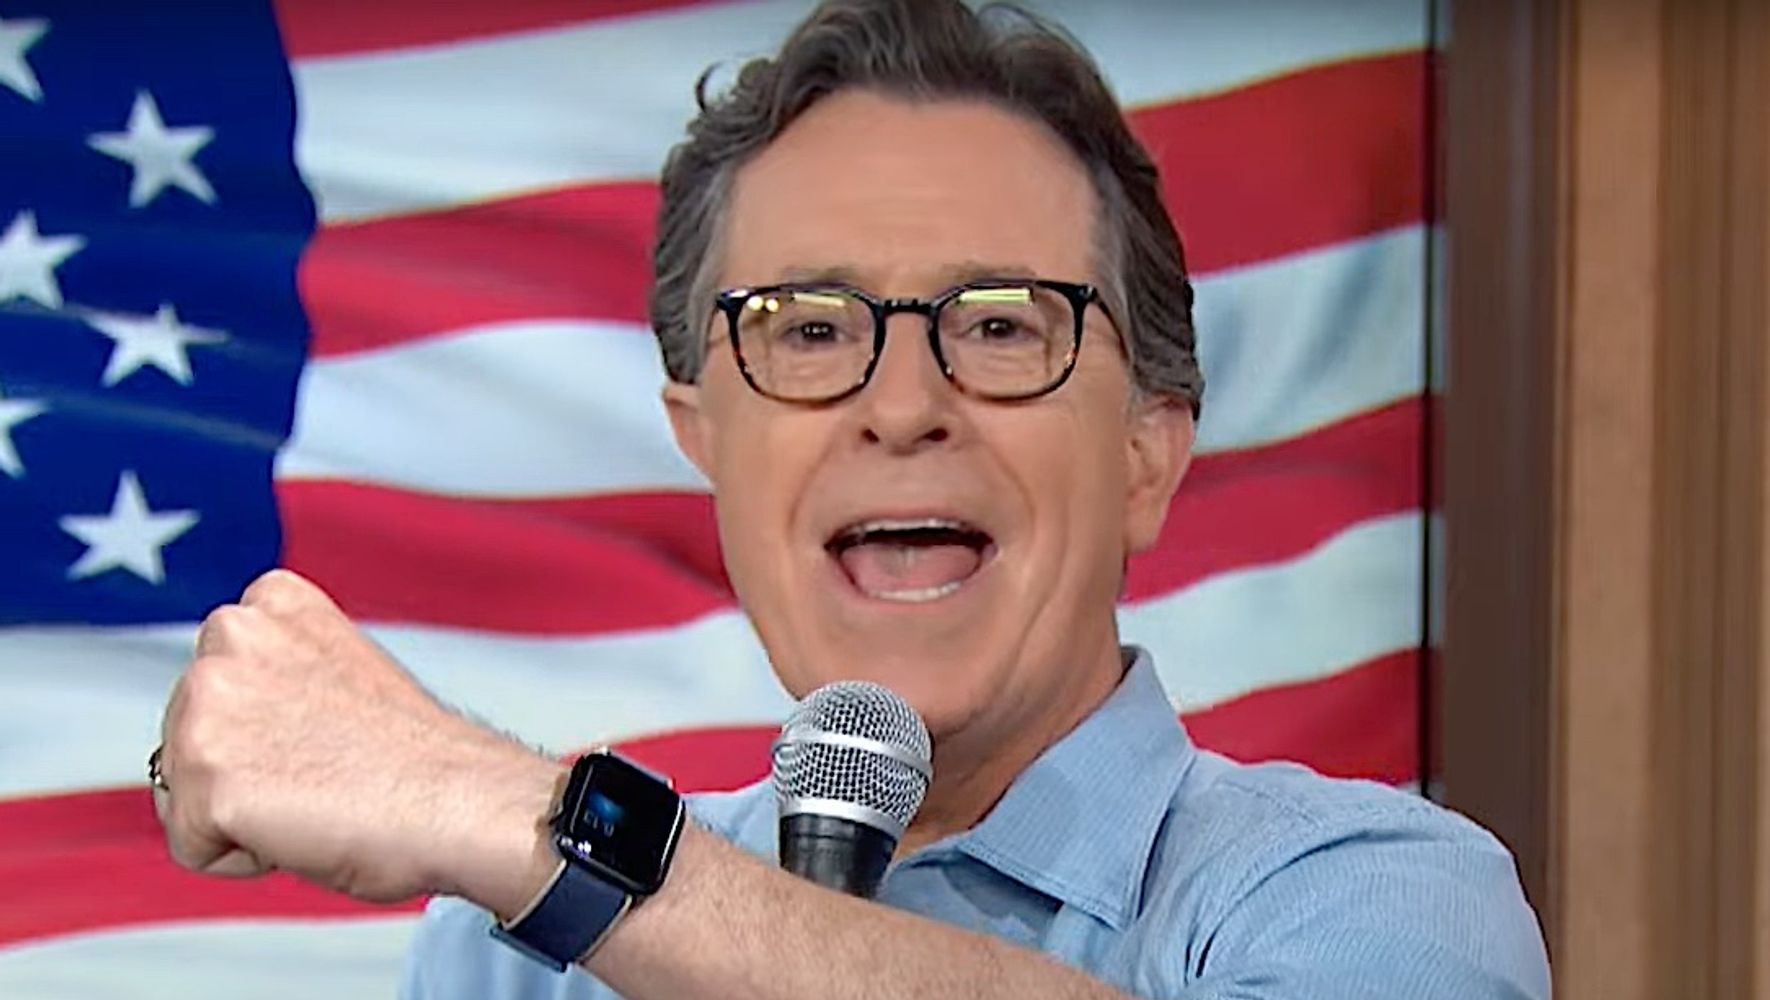 Stephen Colbert Gives GOP A Demented New Anthem After 'Land Of The Home' Flub